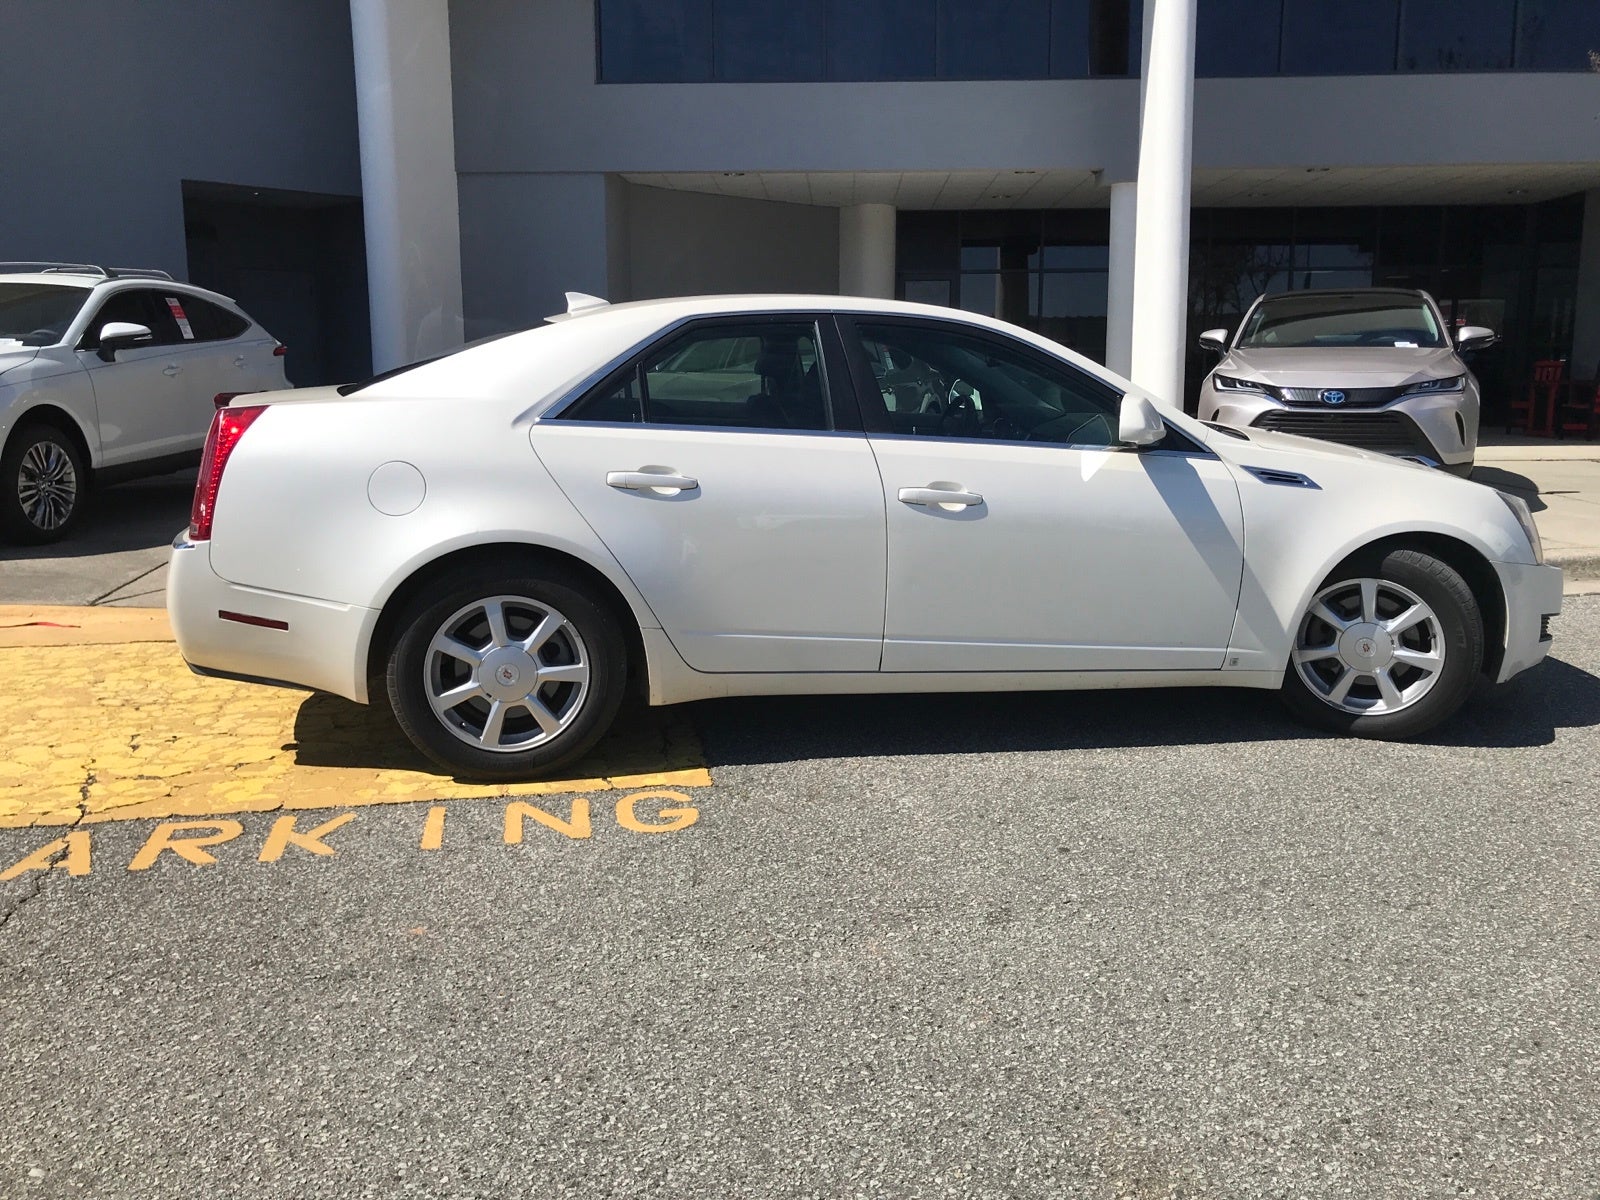 Used 2009 Cadillac CTS 1SB with VIN 1G6DU57V890167923 for sale in Durham, NC